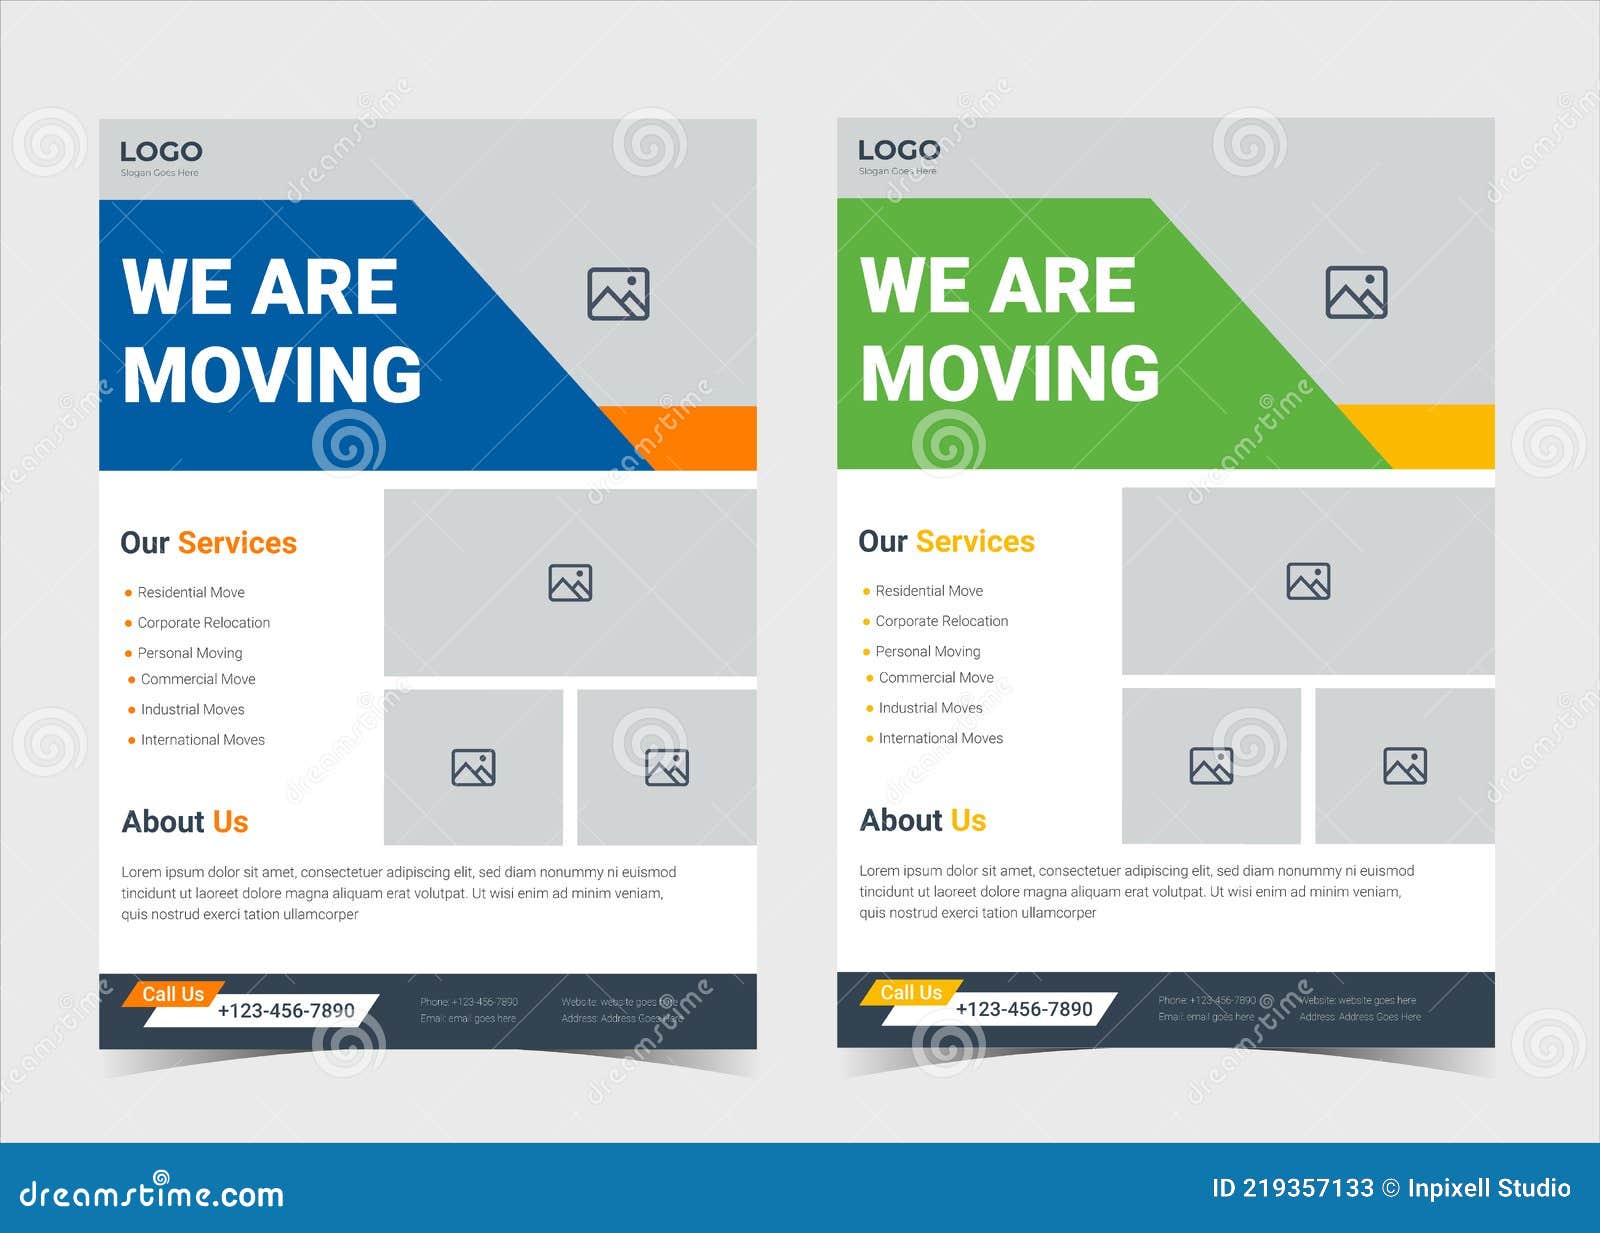 We are Moving Flyer Template. House Shifting Services Poster With Moving Flyer Template